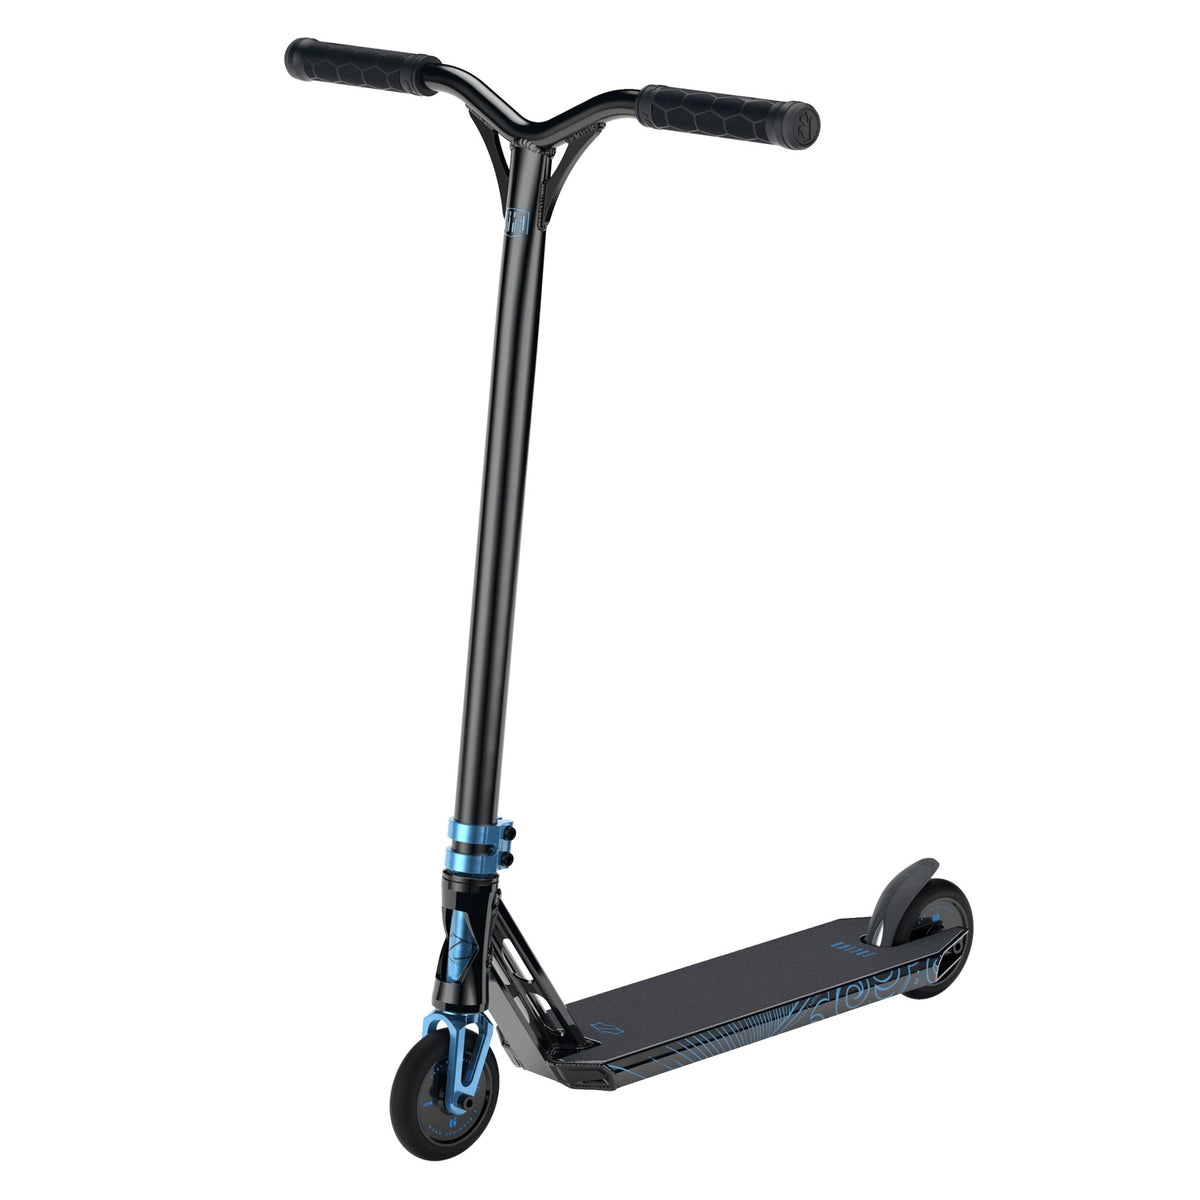 The Fuzion 2022 - The Best Complete Pro Scooter Ever Made! Bland Pro Shop